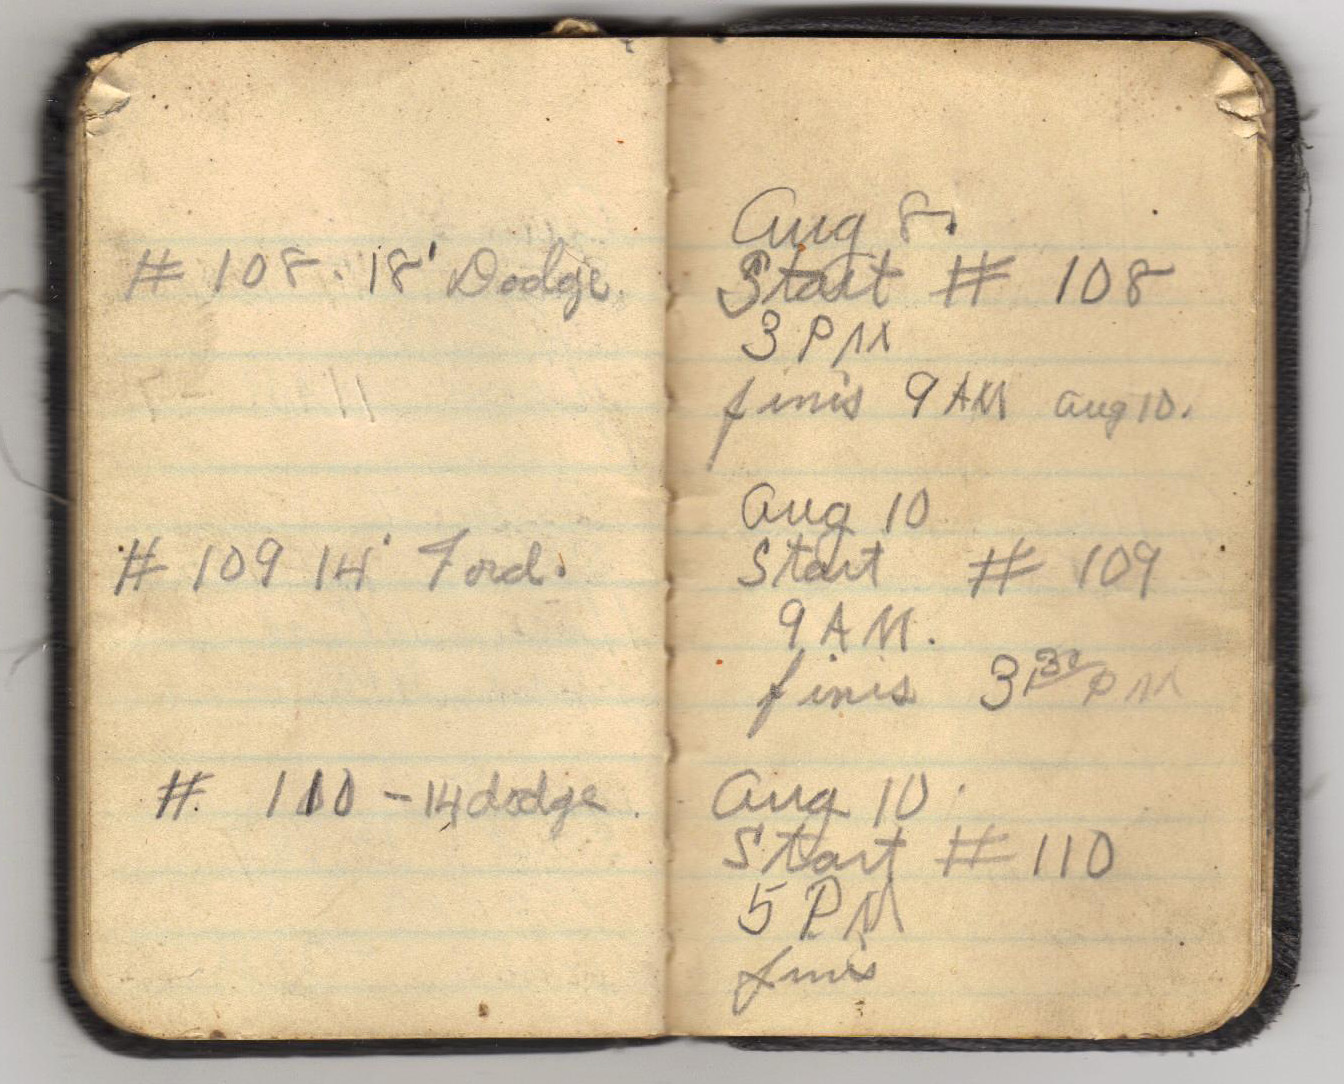  Pages from Ollie Eager's 1936 handwritten log book. 